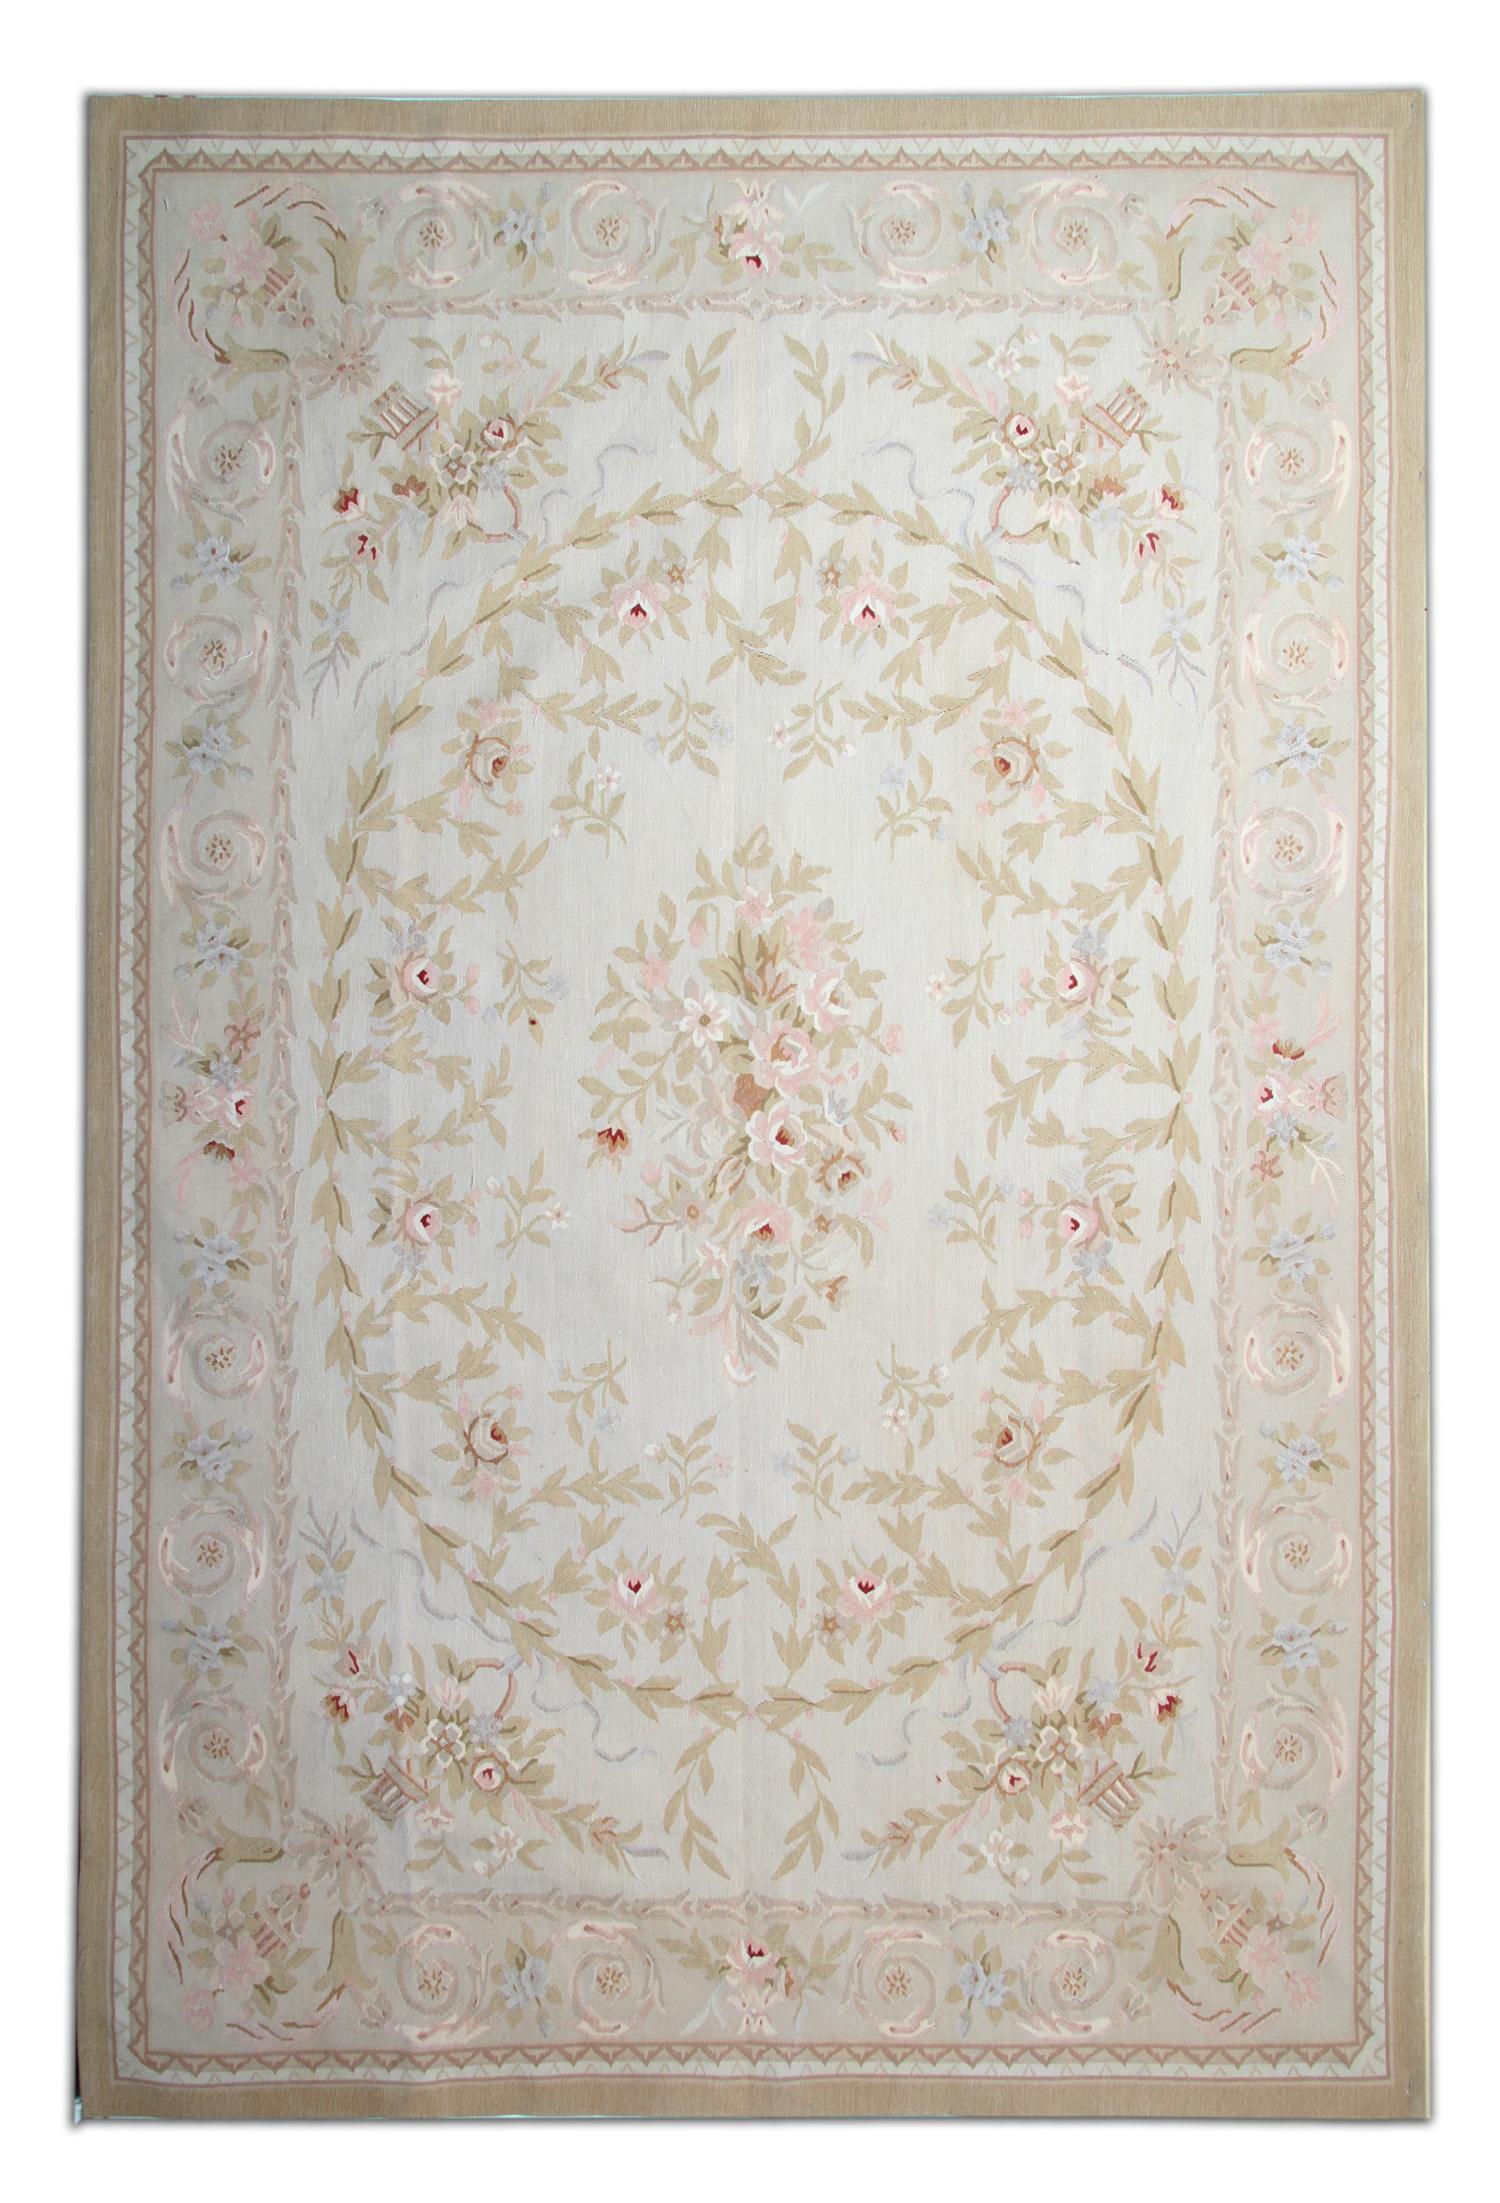 This beautifully handwoven Aubusson rug is sure to make a great accent piece in any room it’s introduced too. An ivory blue color makes up the background of this elegant area rug. This is then decorated with a symmetrical floral design which is made